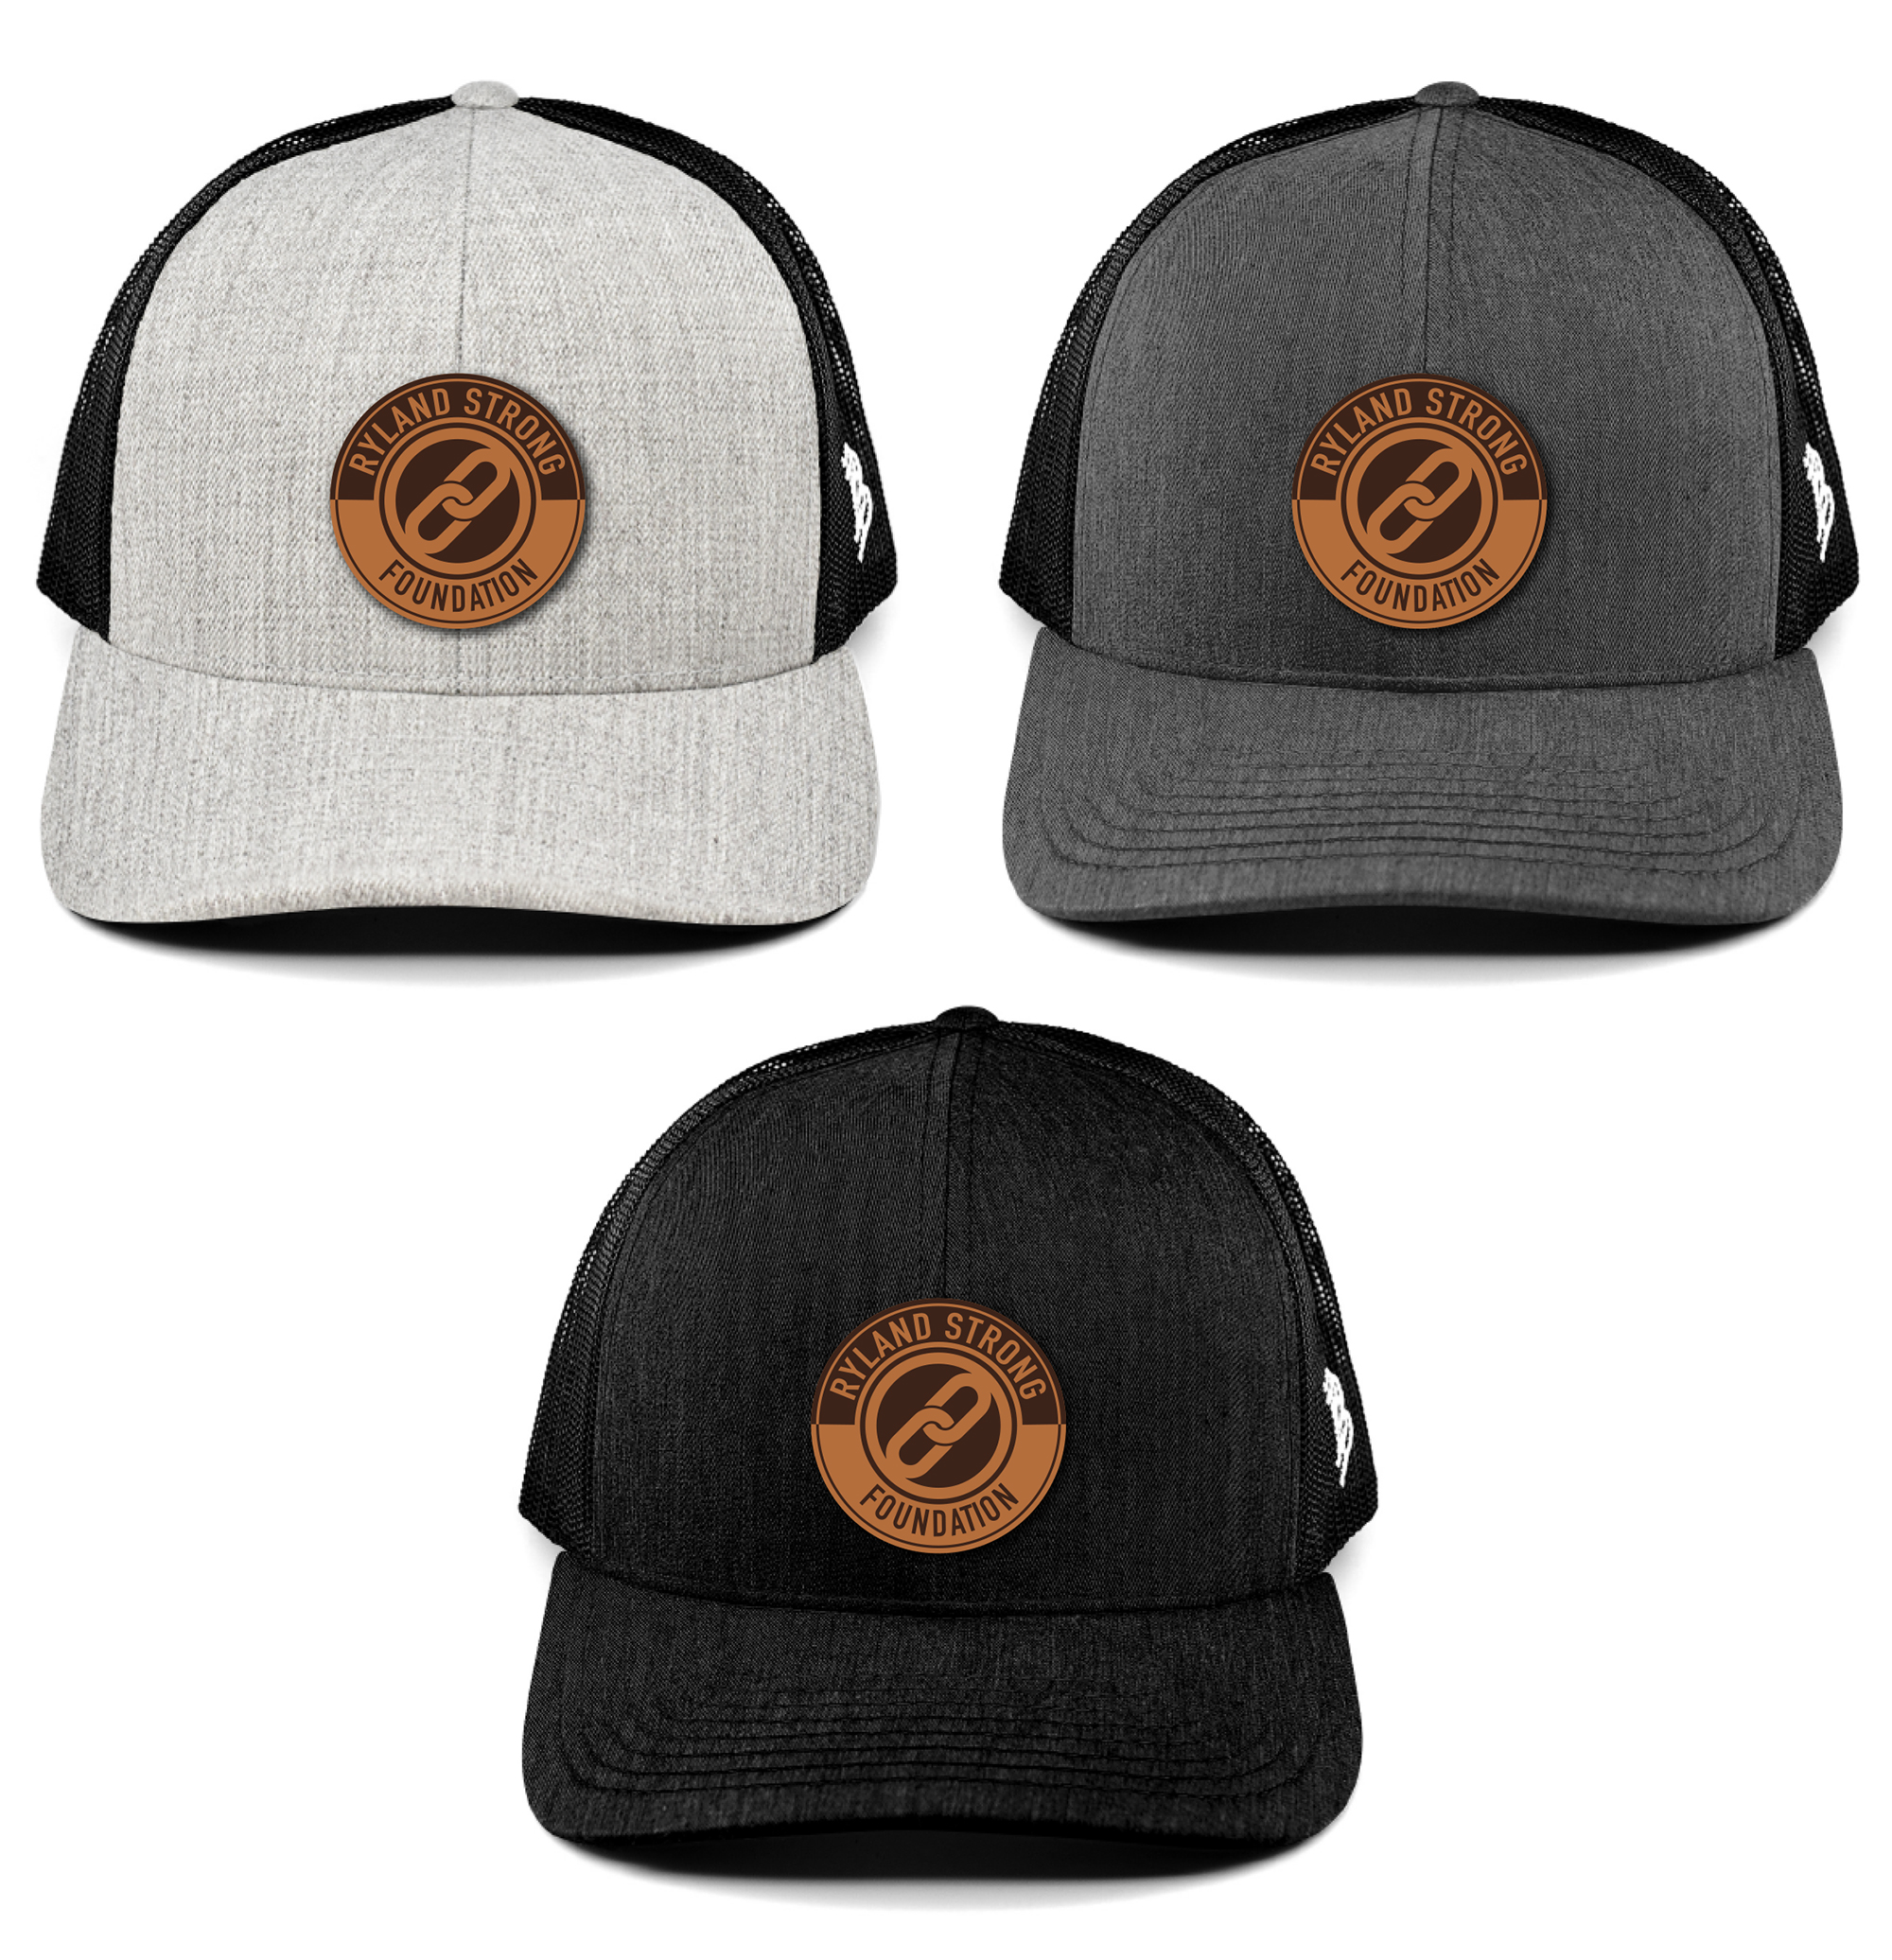 Flexfit Snapback Trucker Hat W Circular Ryland Strong Leather Patch